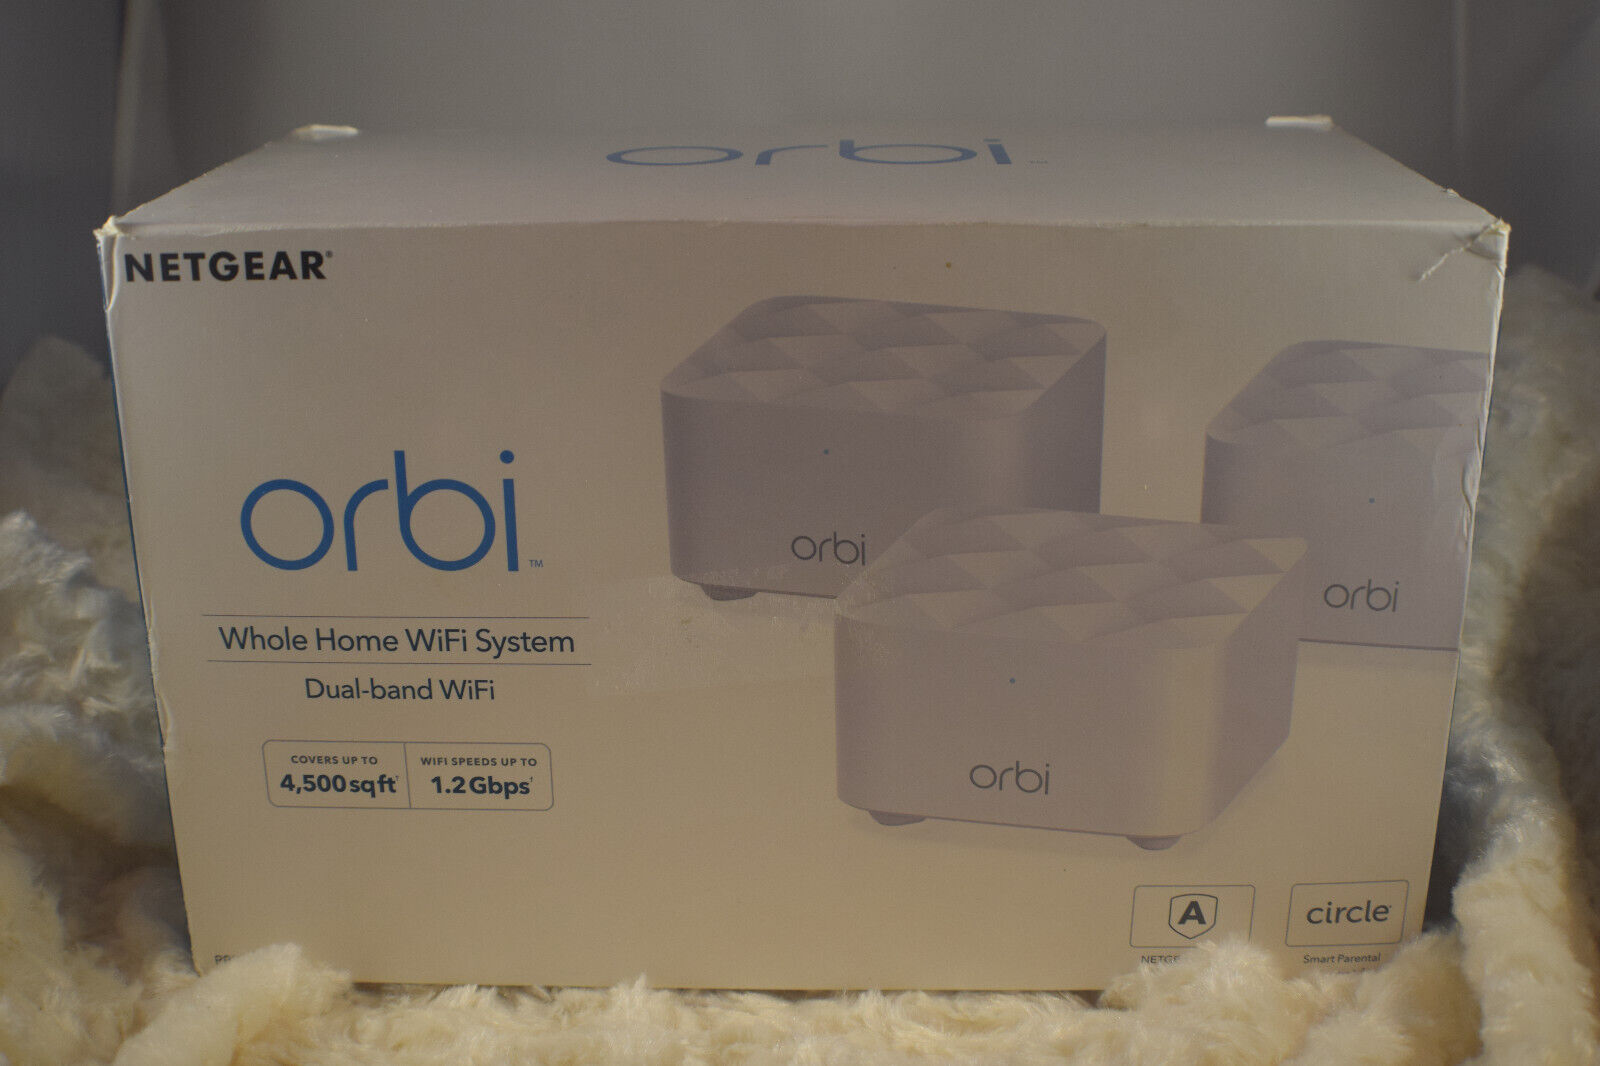 New/Open Box Netgear Orbi RBK13-100NAS Whole Home WiFi System Router Dual Band